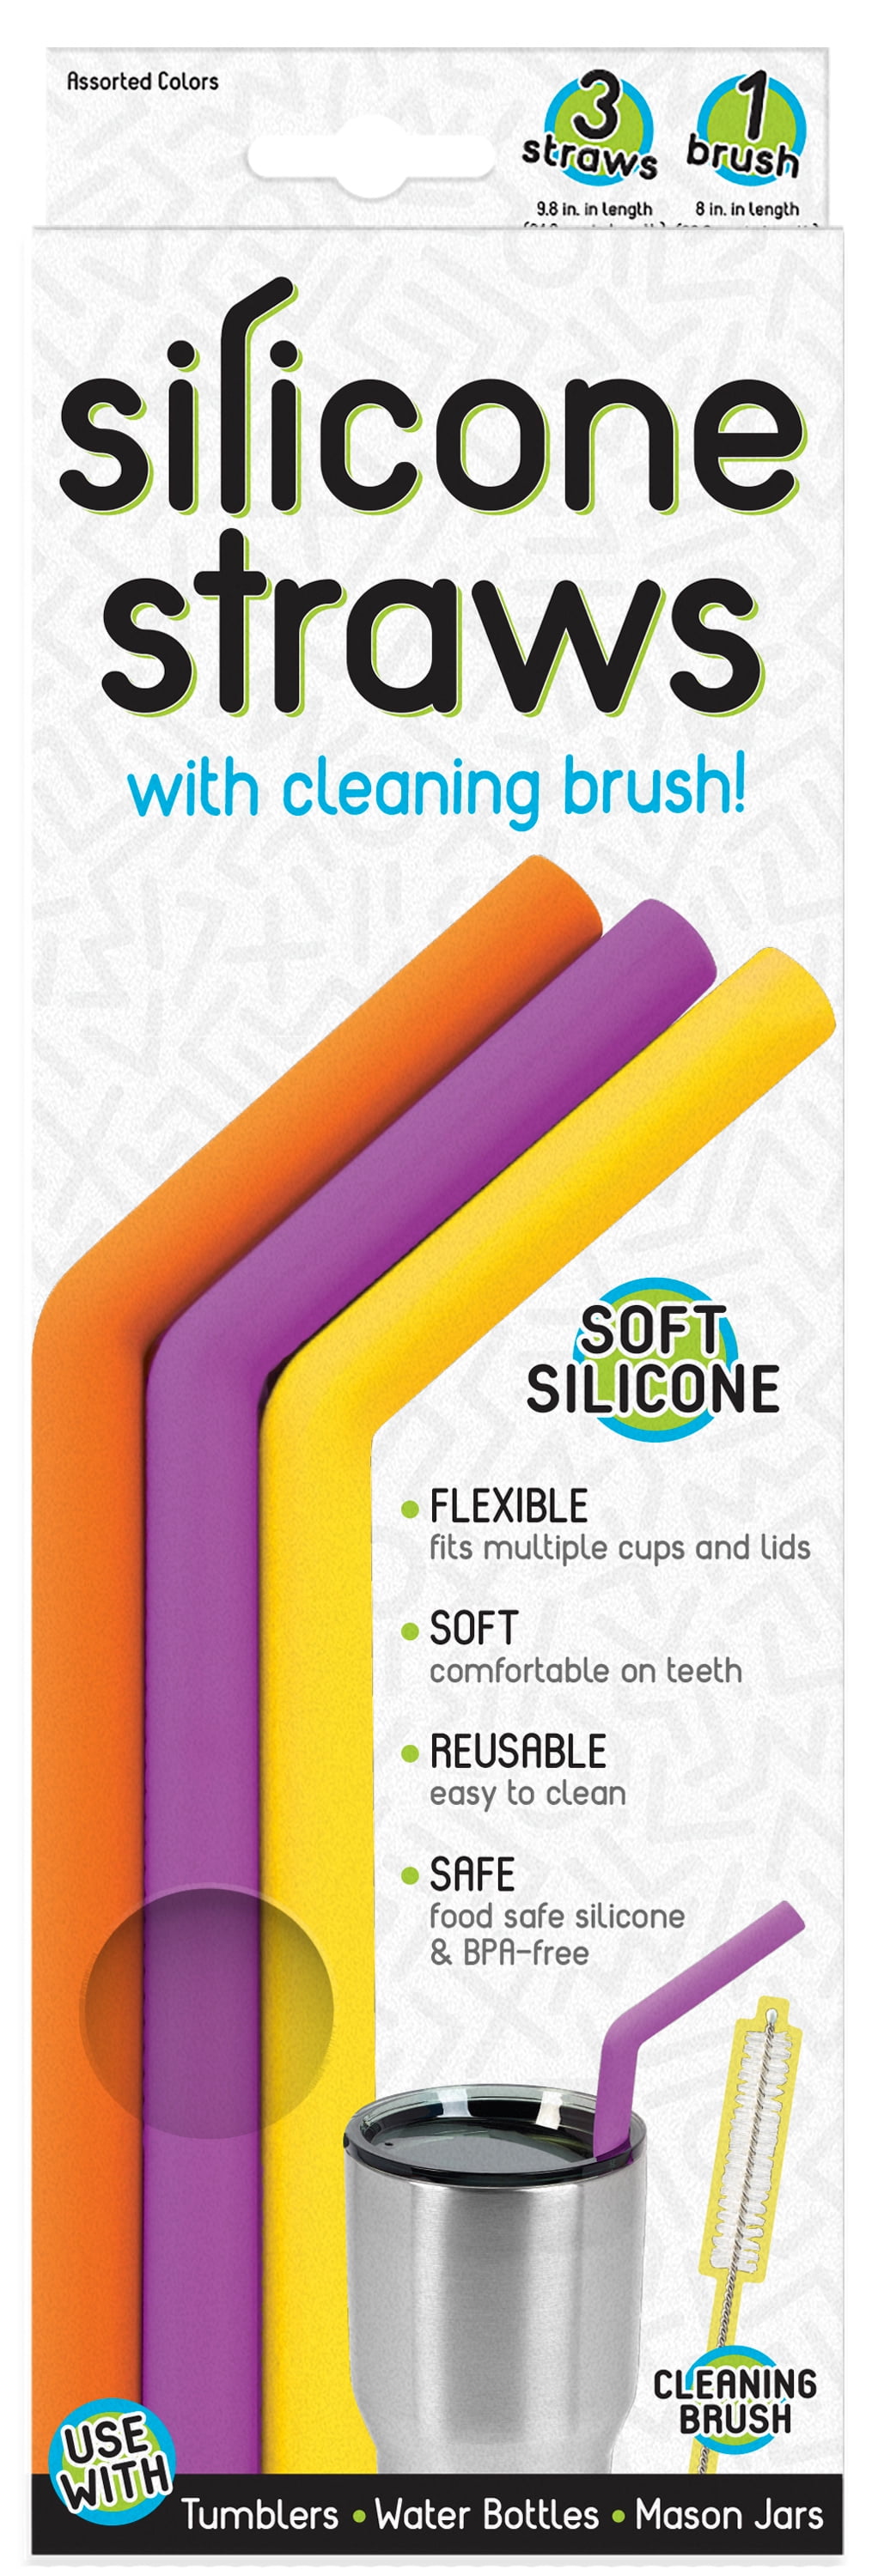 ICONIQ Re-Usable Silicone Straws with Cleaning Brush - Pack of 6 - Lar